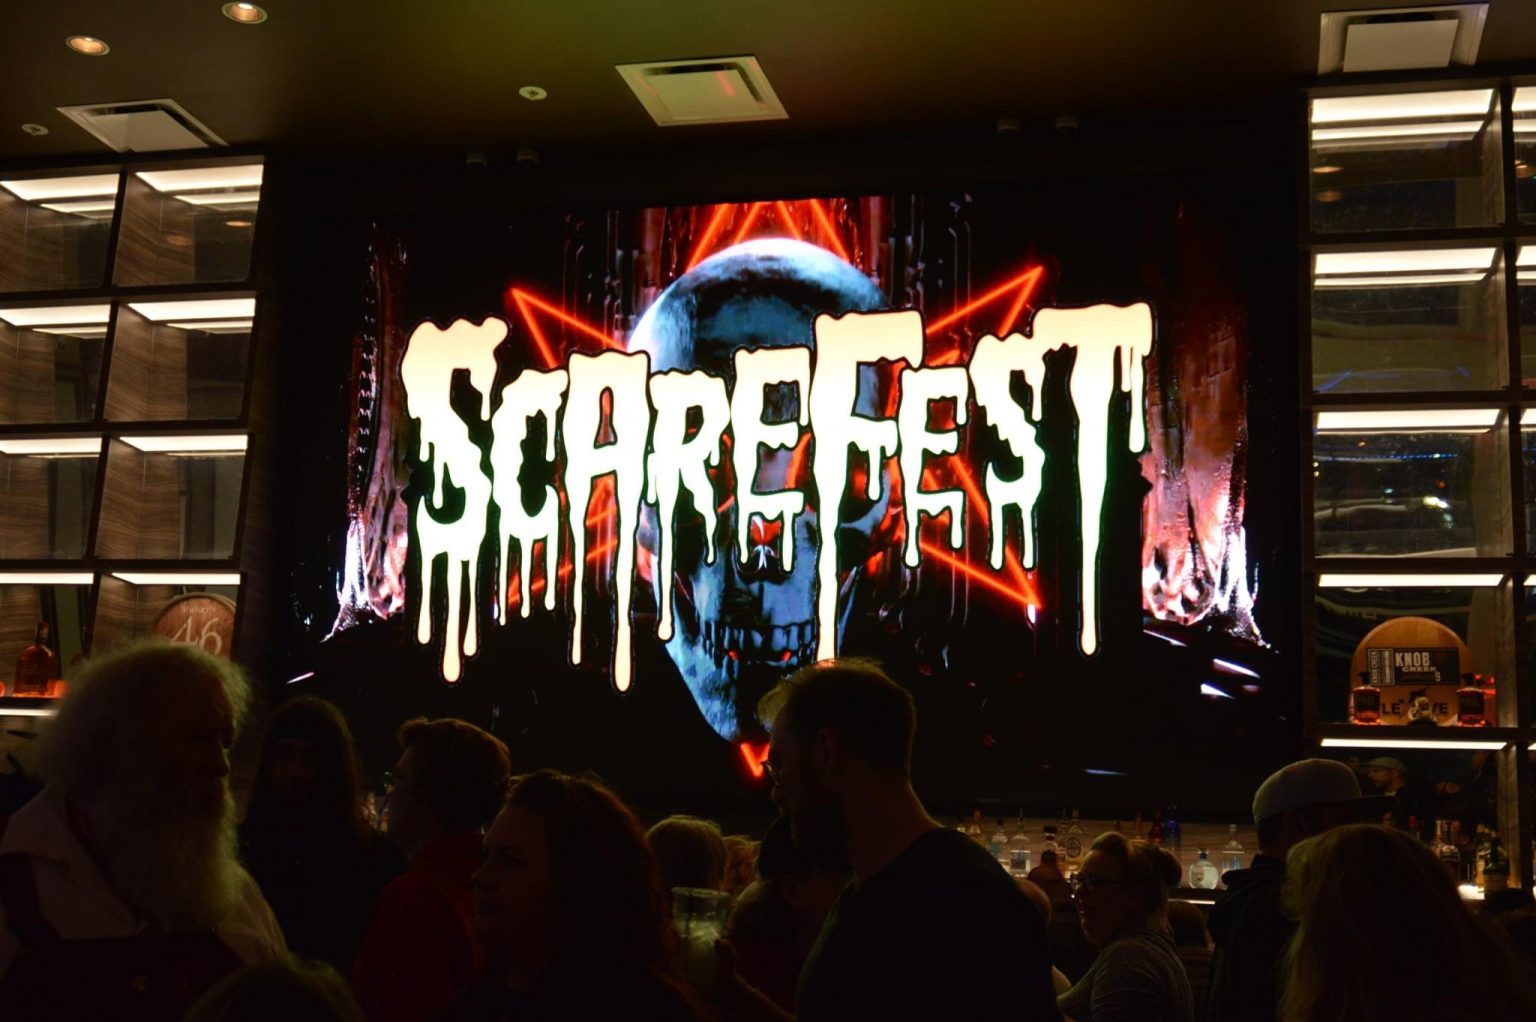 ScareFest is back for its 15th year. Featuring celebrity guests, over